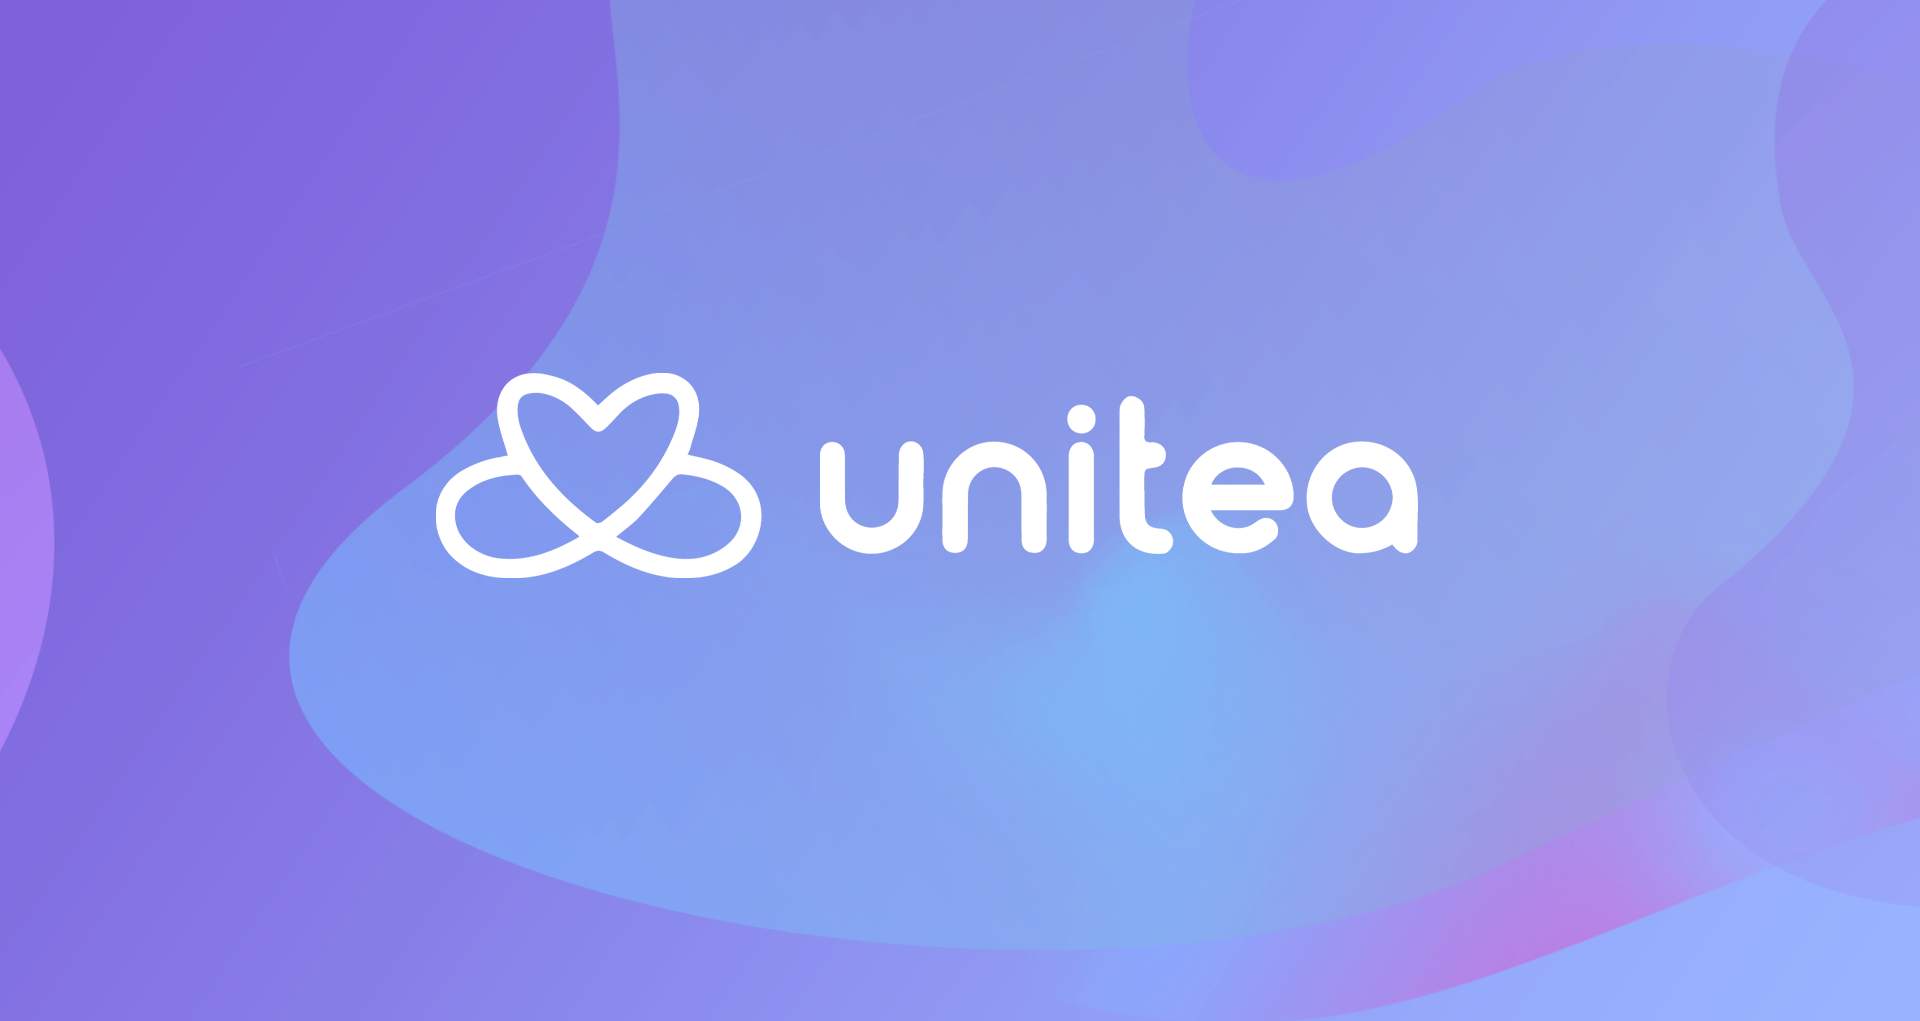 Engage-to-Earn Social Media Platform Unitea Reveals Artist-Centric Reward Experiences With Claude VonStroke, The Brooklyn Mirage + more